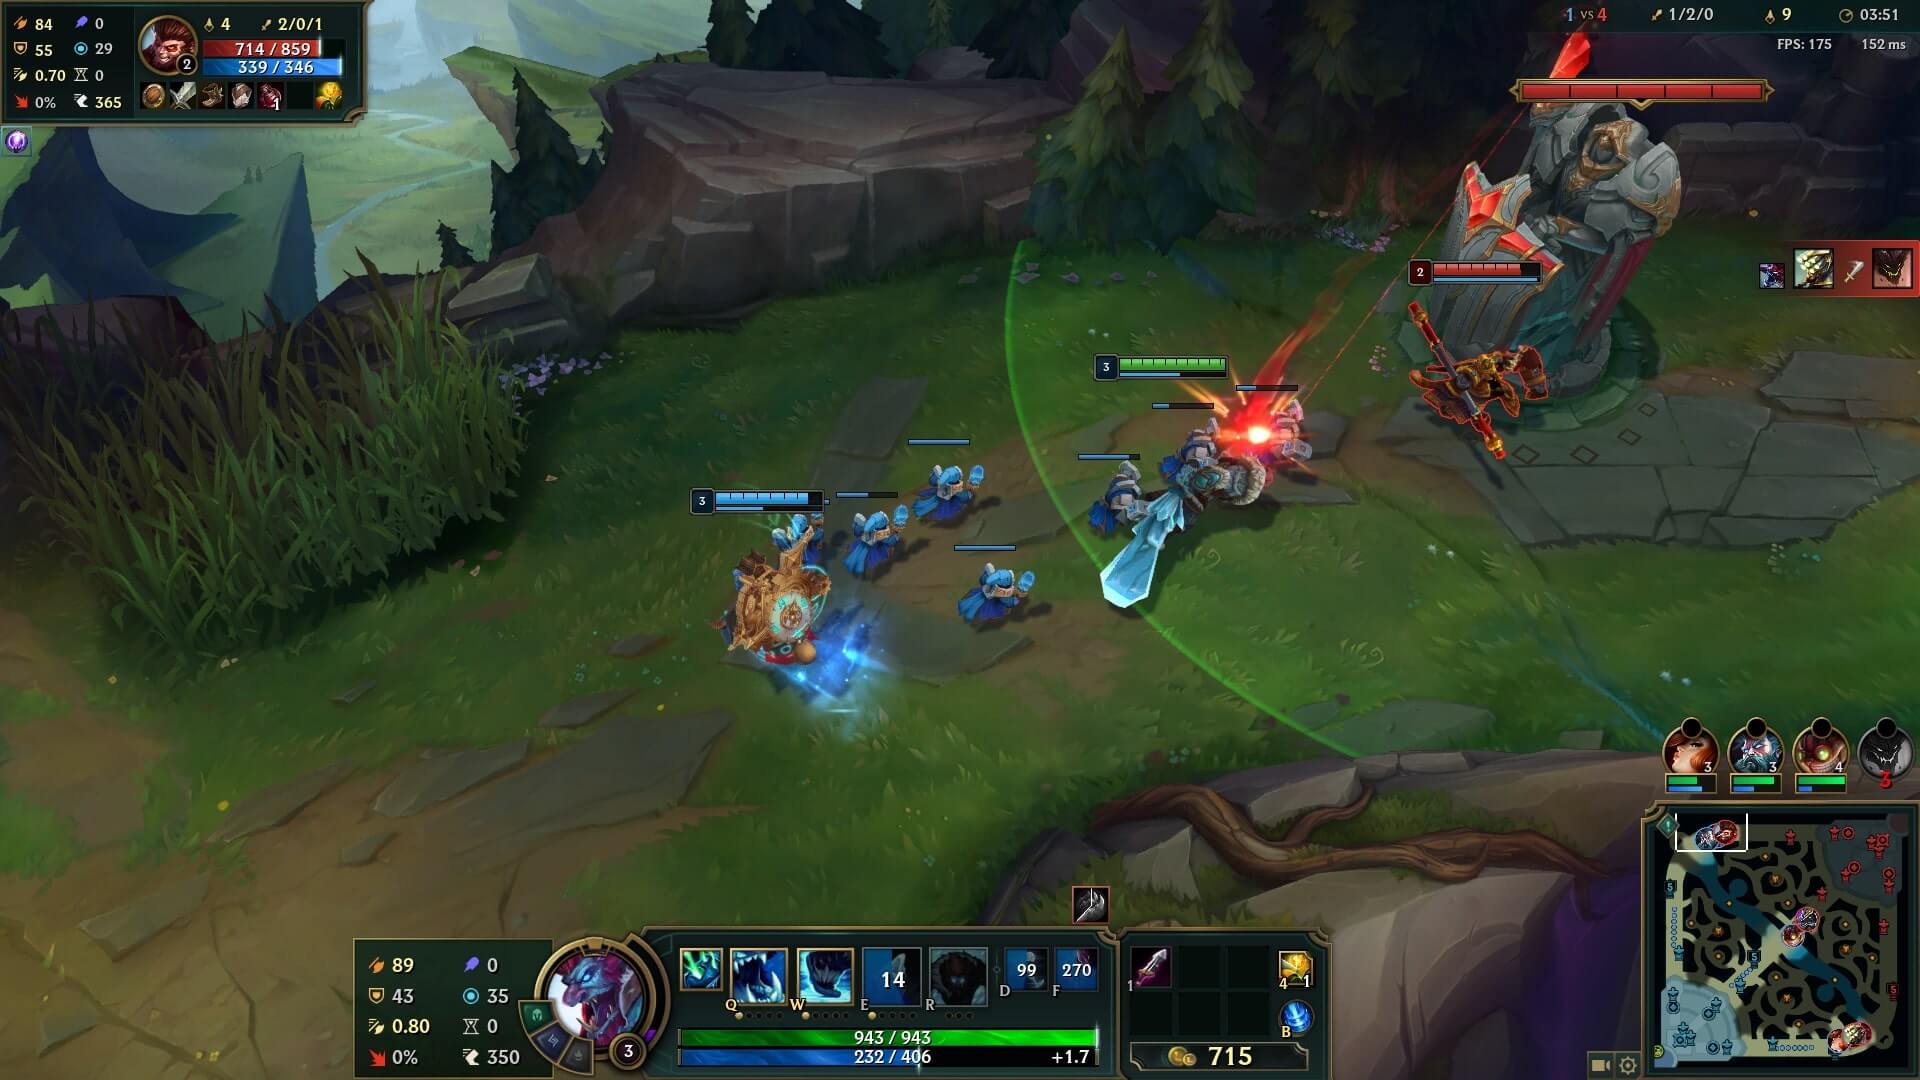 Gameplay From League of Legends 